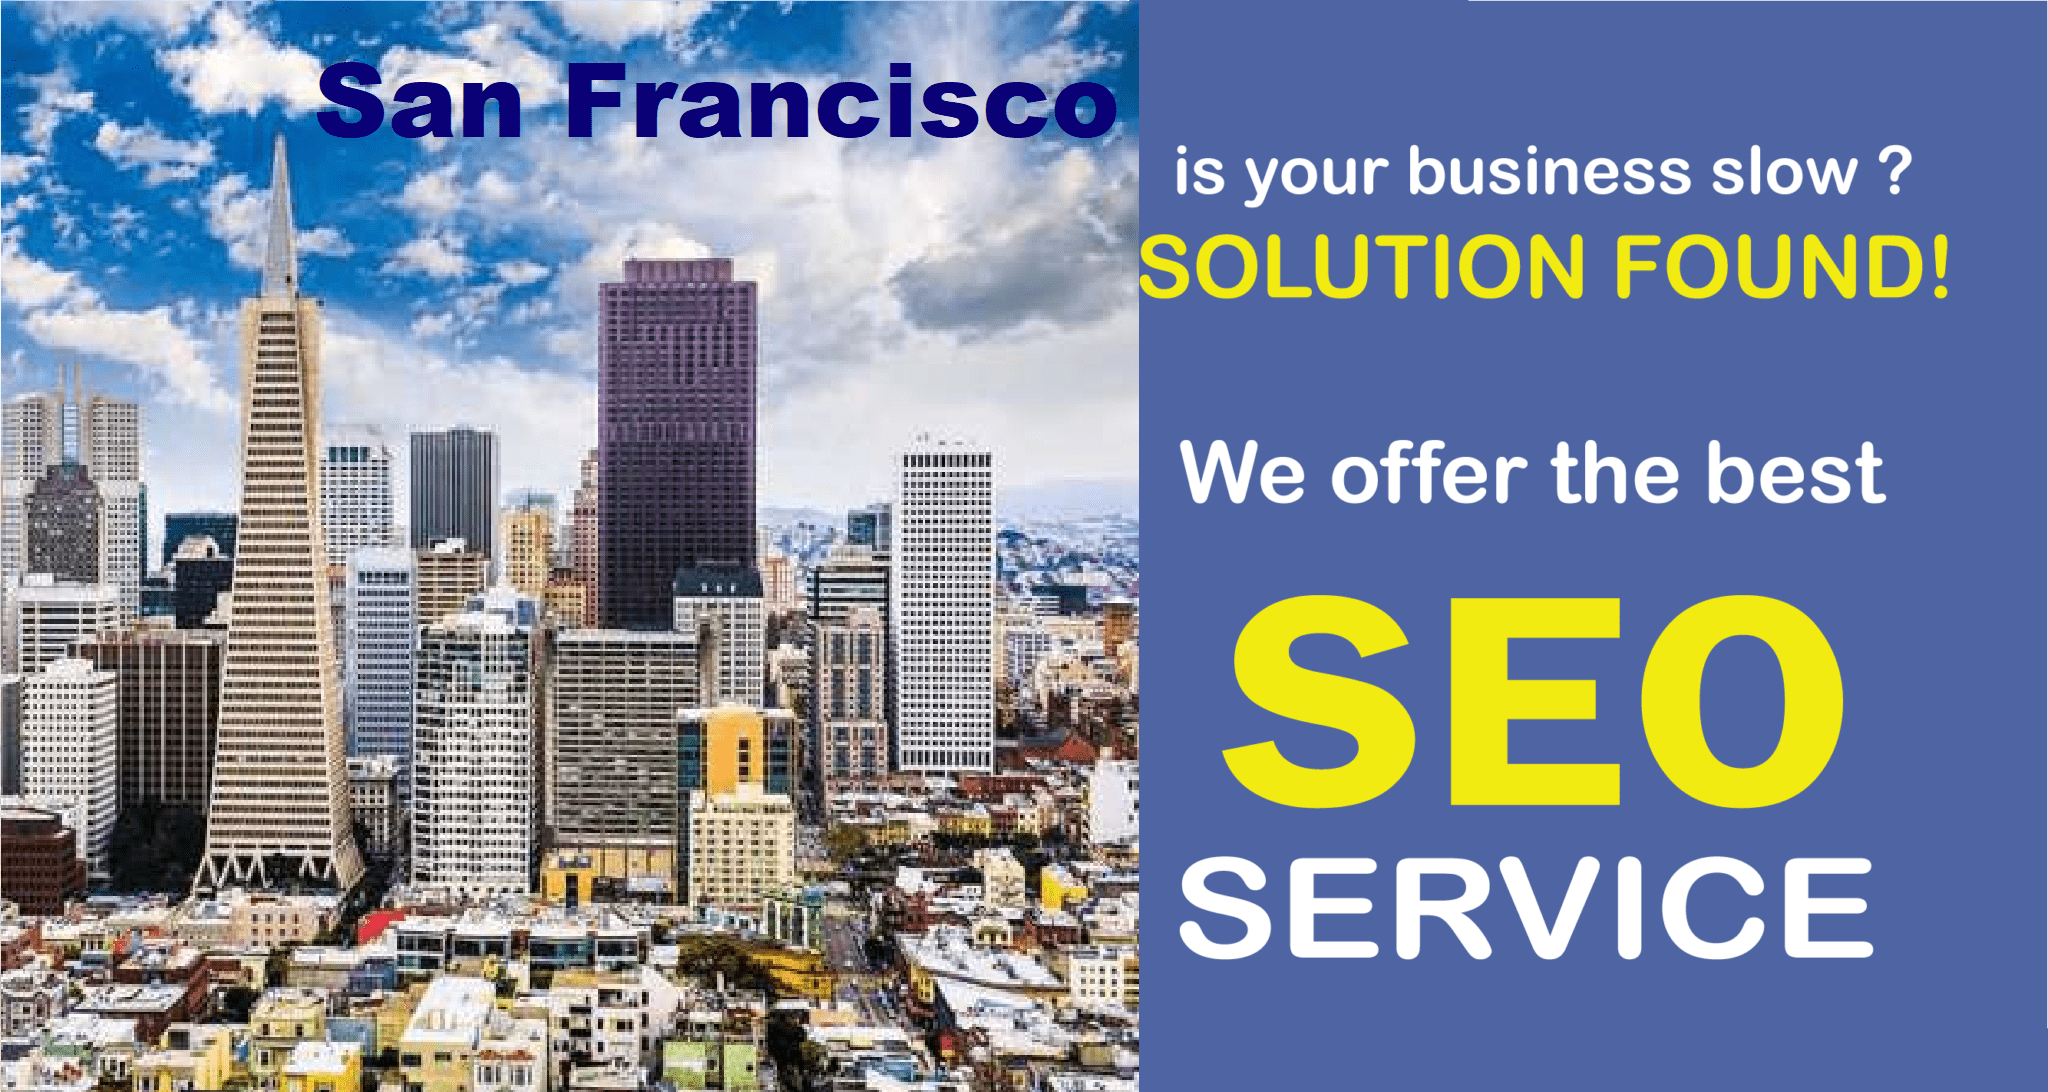 SEO Agency in San Francisco for Search Engine Optimization Services